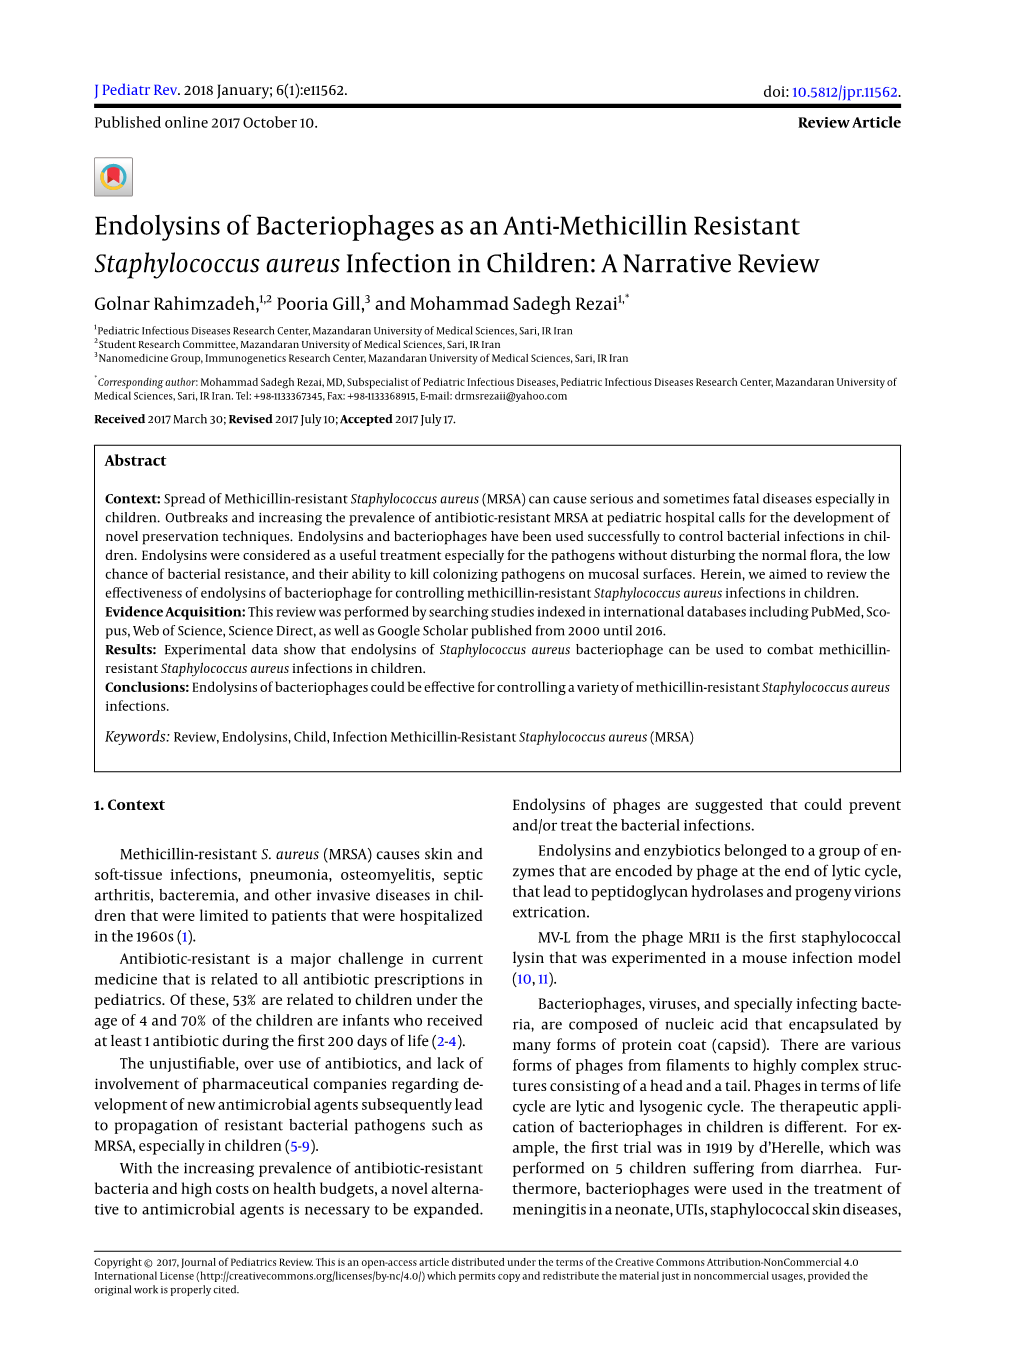 Endolysins of Bacteriophages As an Anti-Methicillin Resistant